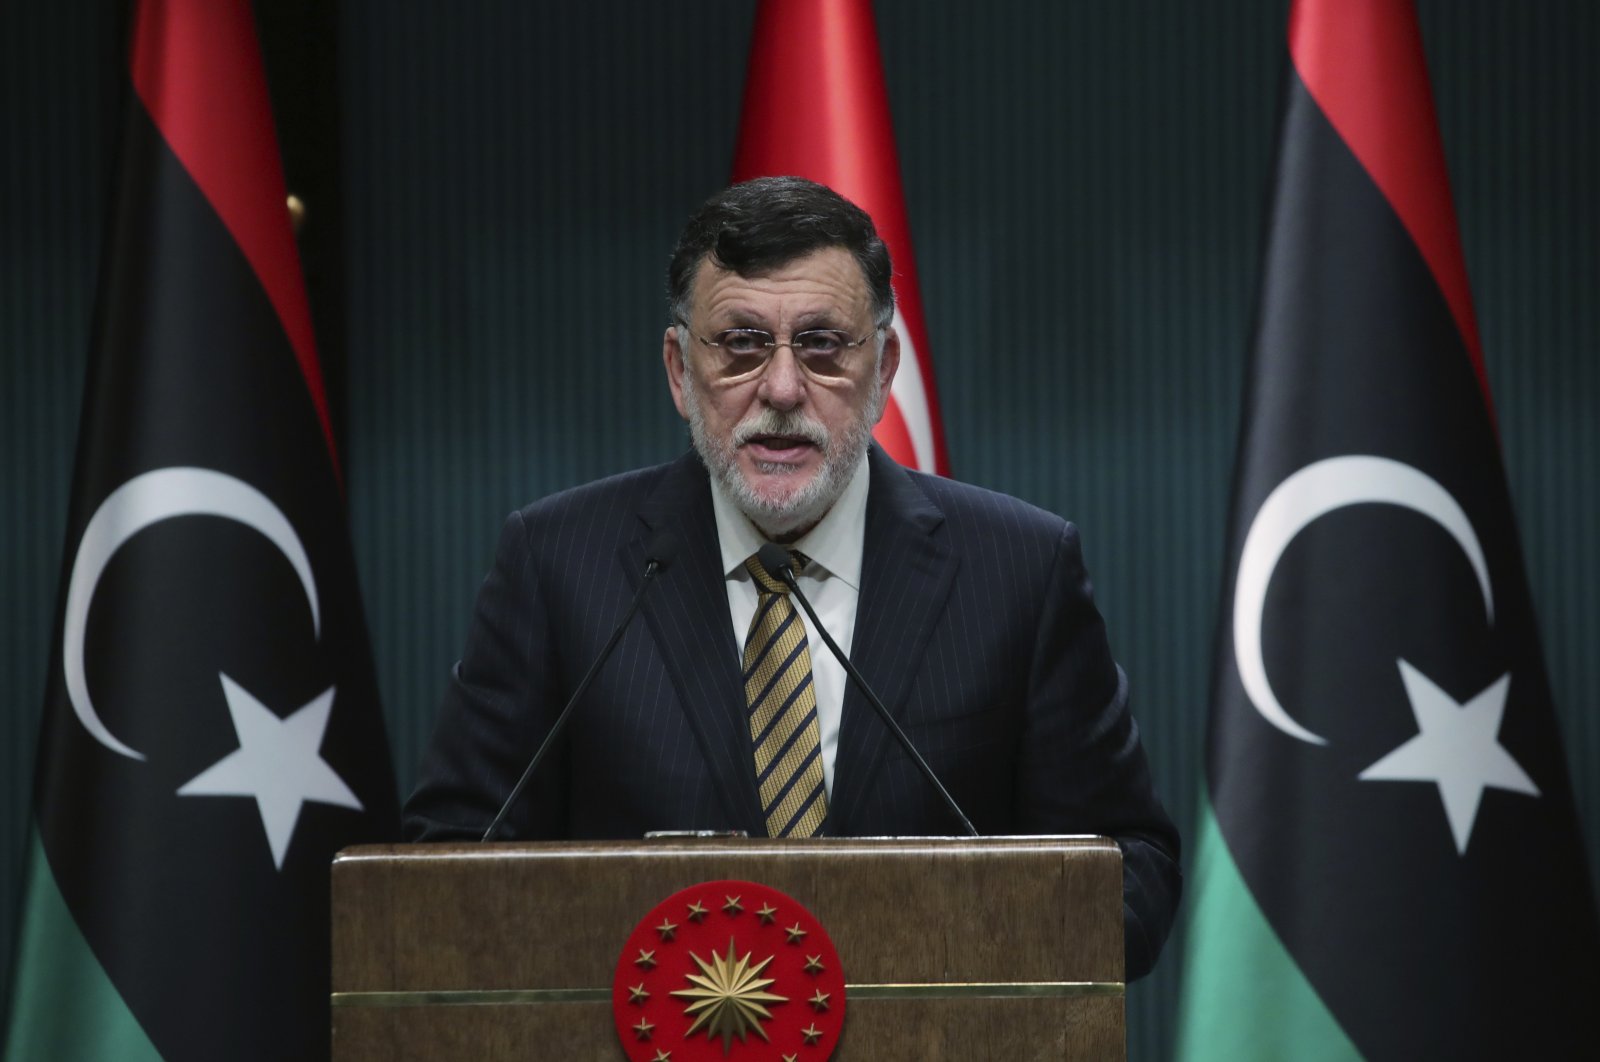 Fayez Sarraj, the head of Libya's internationally recognized Government of National Accord (GNA), speaks at a news conference in Ankara, Turkey, June 4, 2020. (AP Photo)